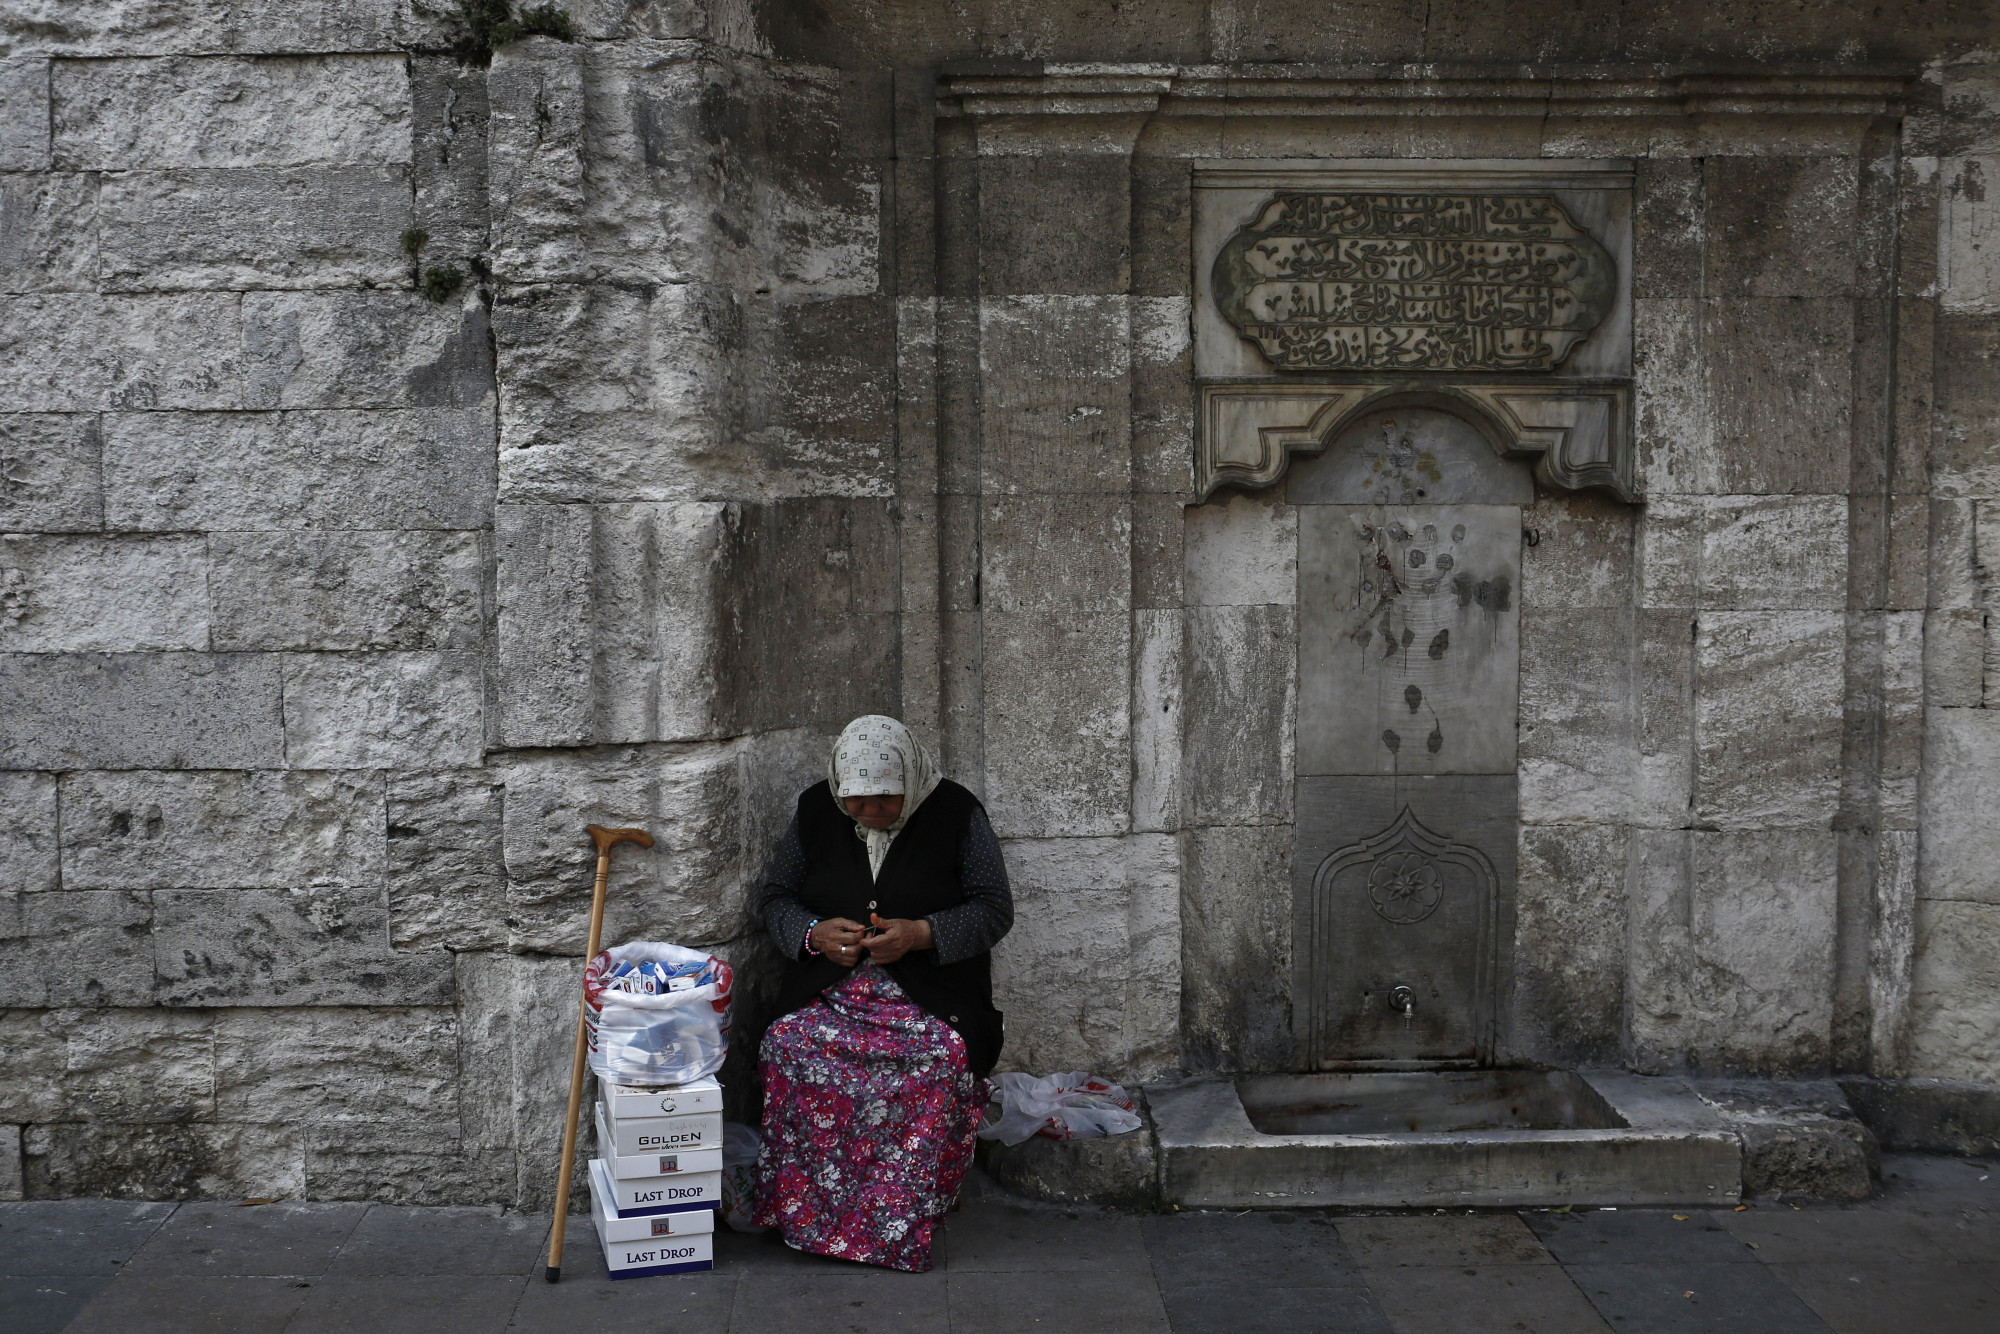 An elderly woman sells packets of tissues on the roadside in Istanbul, Turkey.